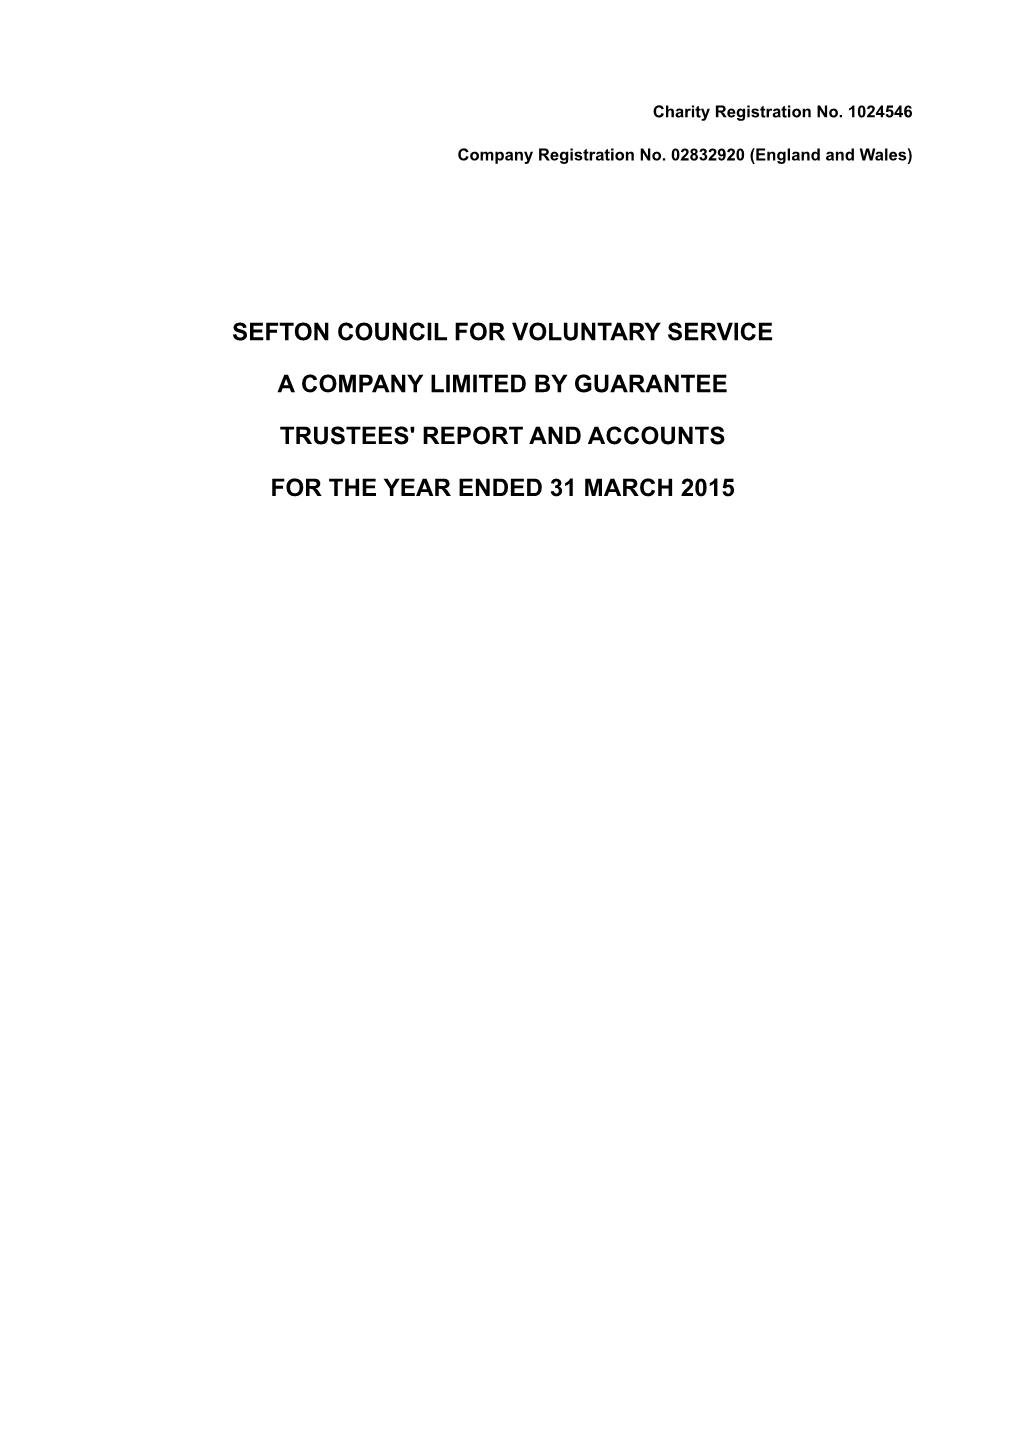 Sefton Council for Voluntary Service a Company Limited by Guarantee Contents